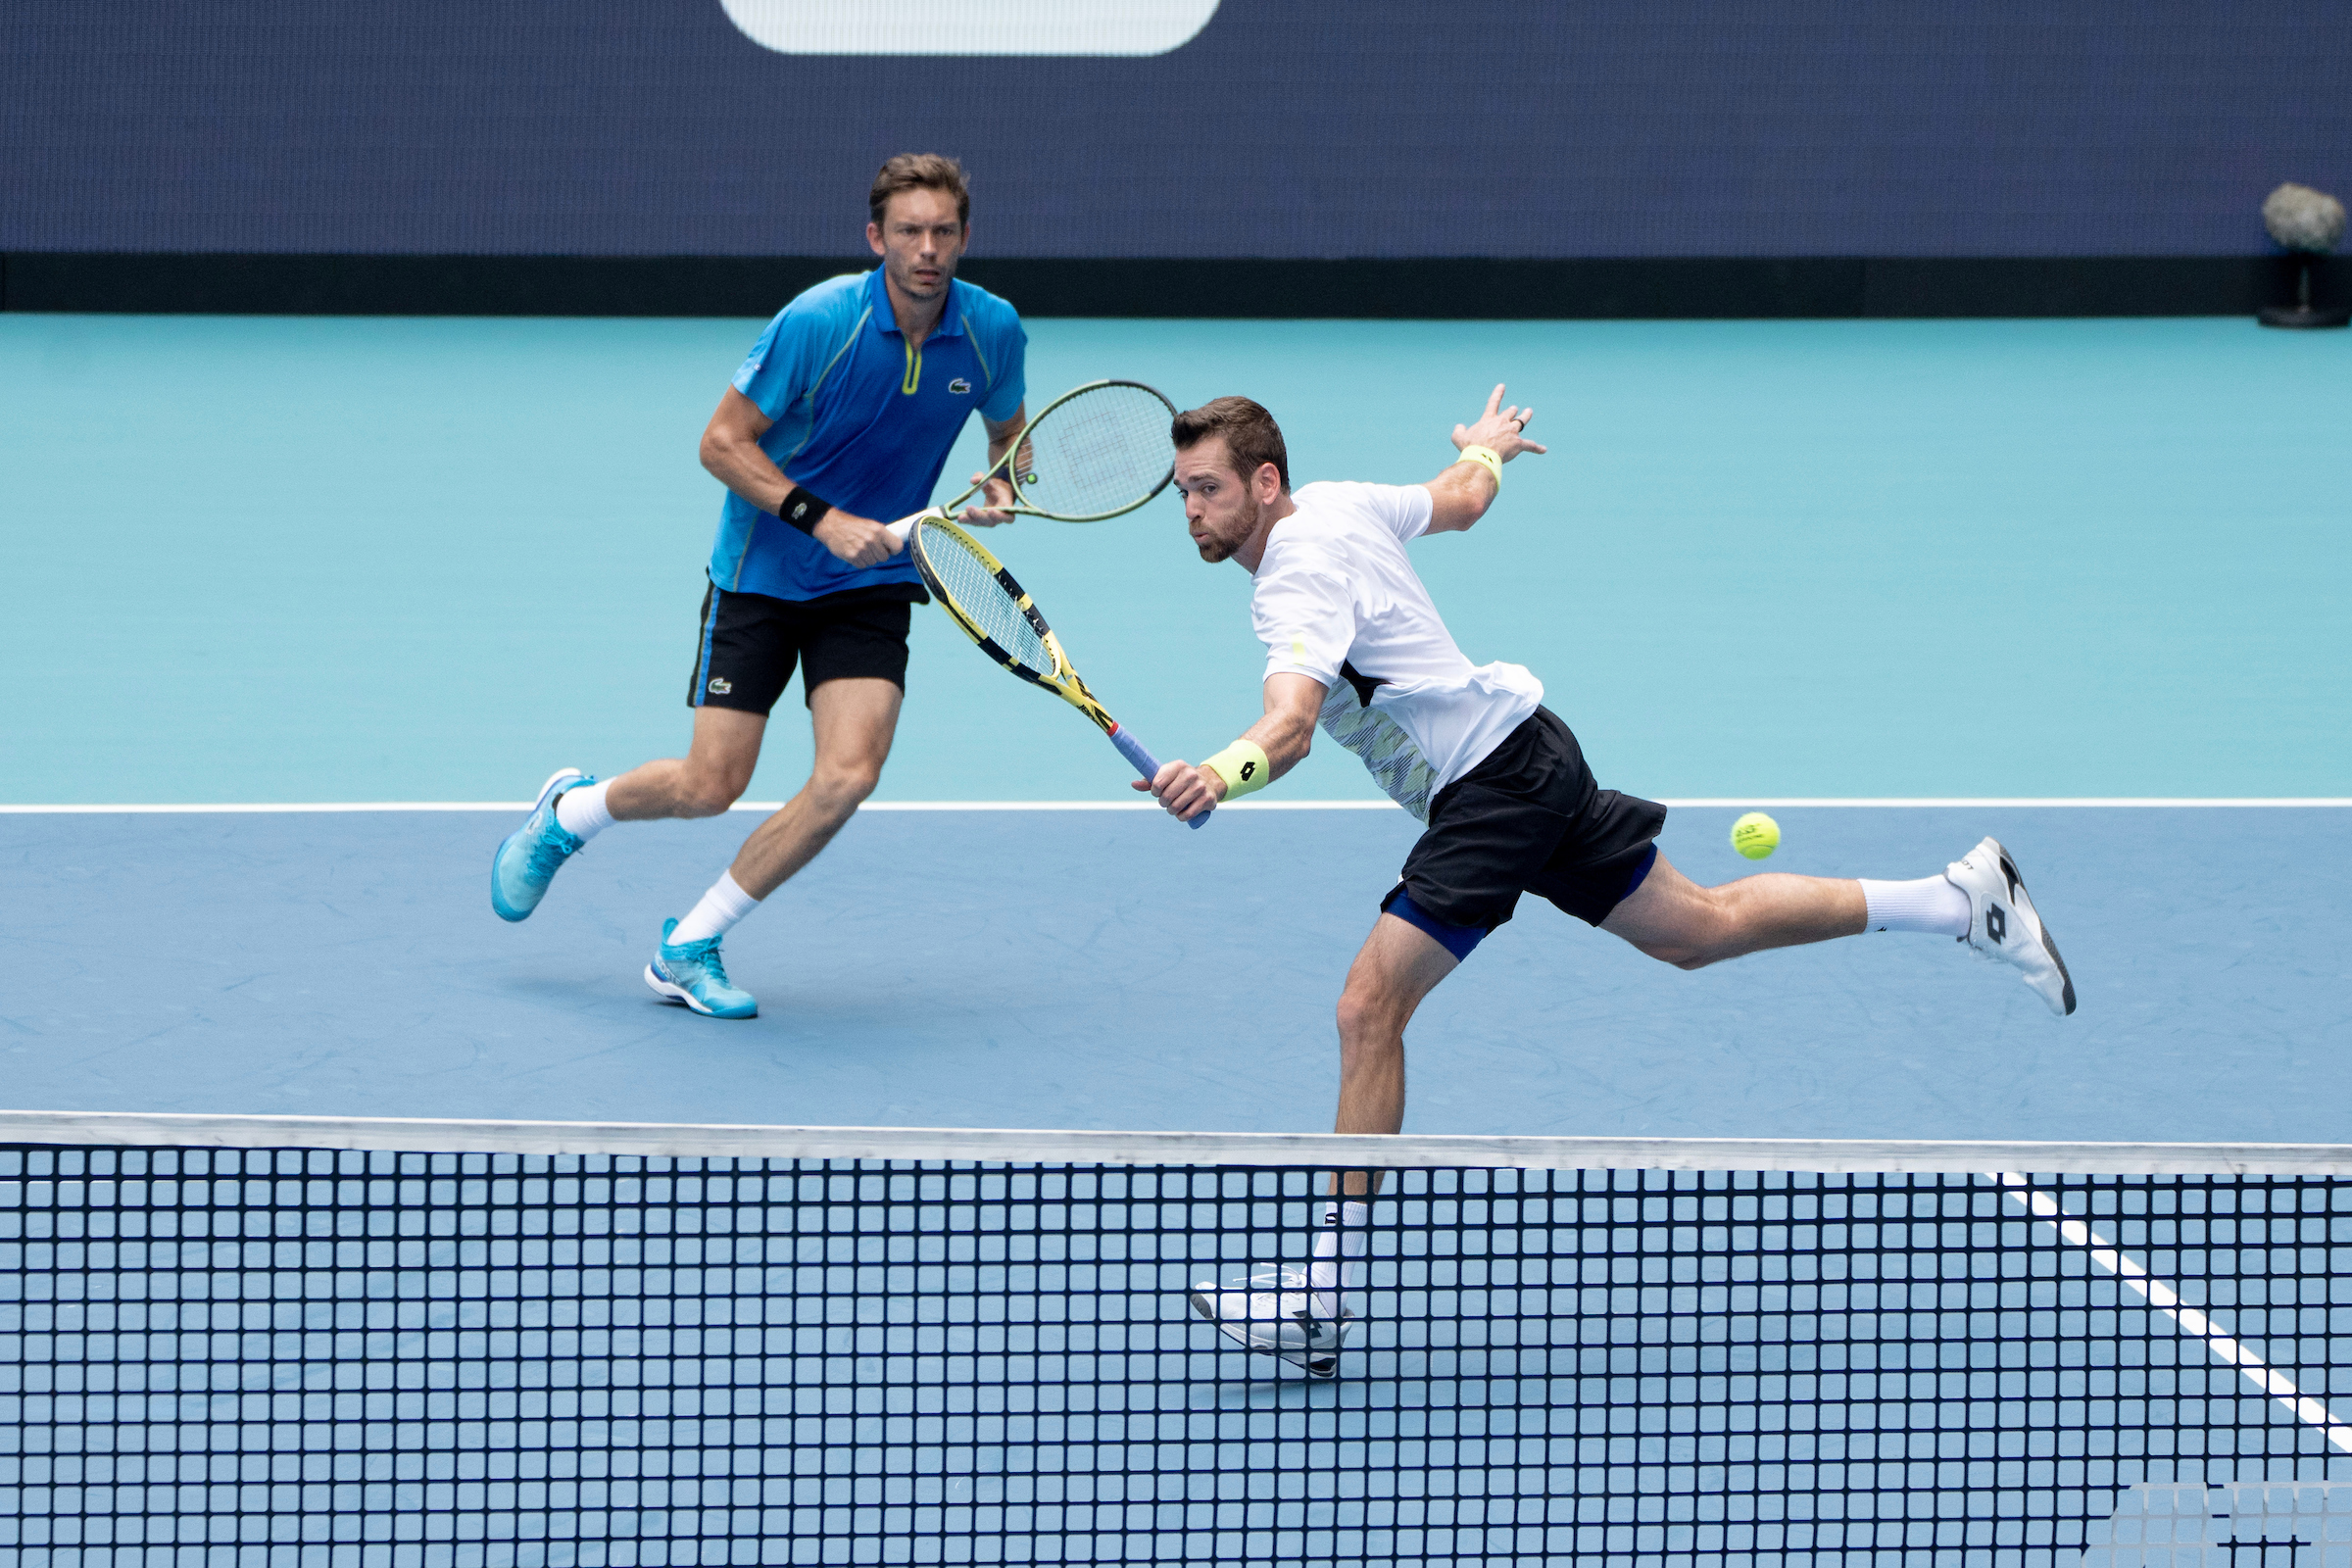 Austin Krajicek stretches for a volley as partner Nicolas Mahut looks on during the 2023 Miami Open Men's Doubles Final in Miami Gardens on April 1st, 2023.